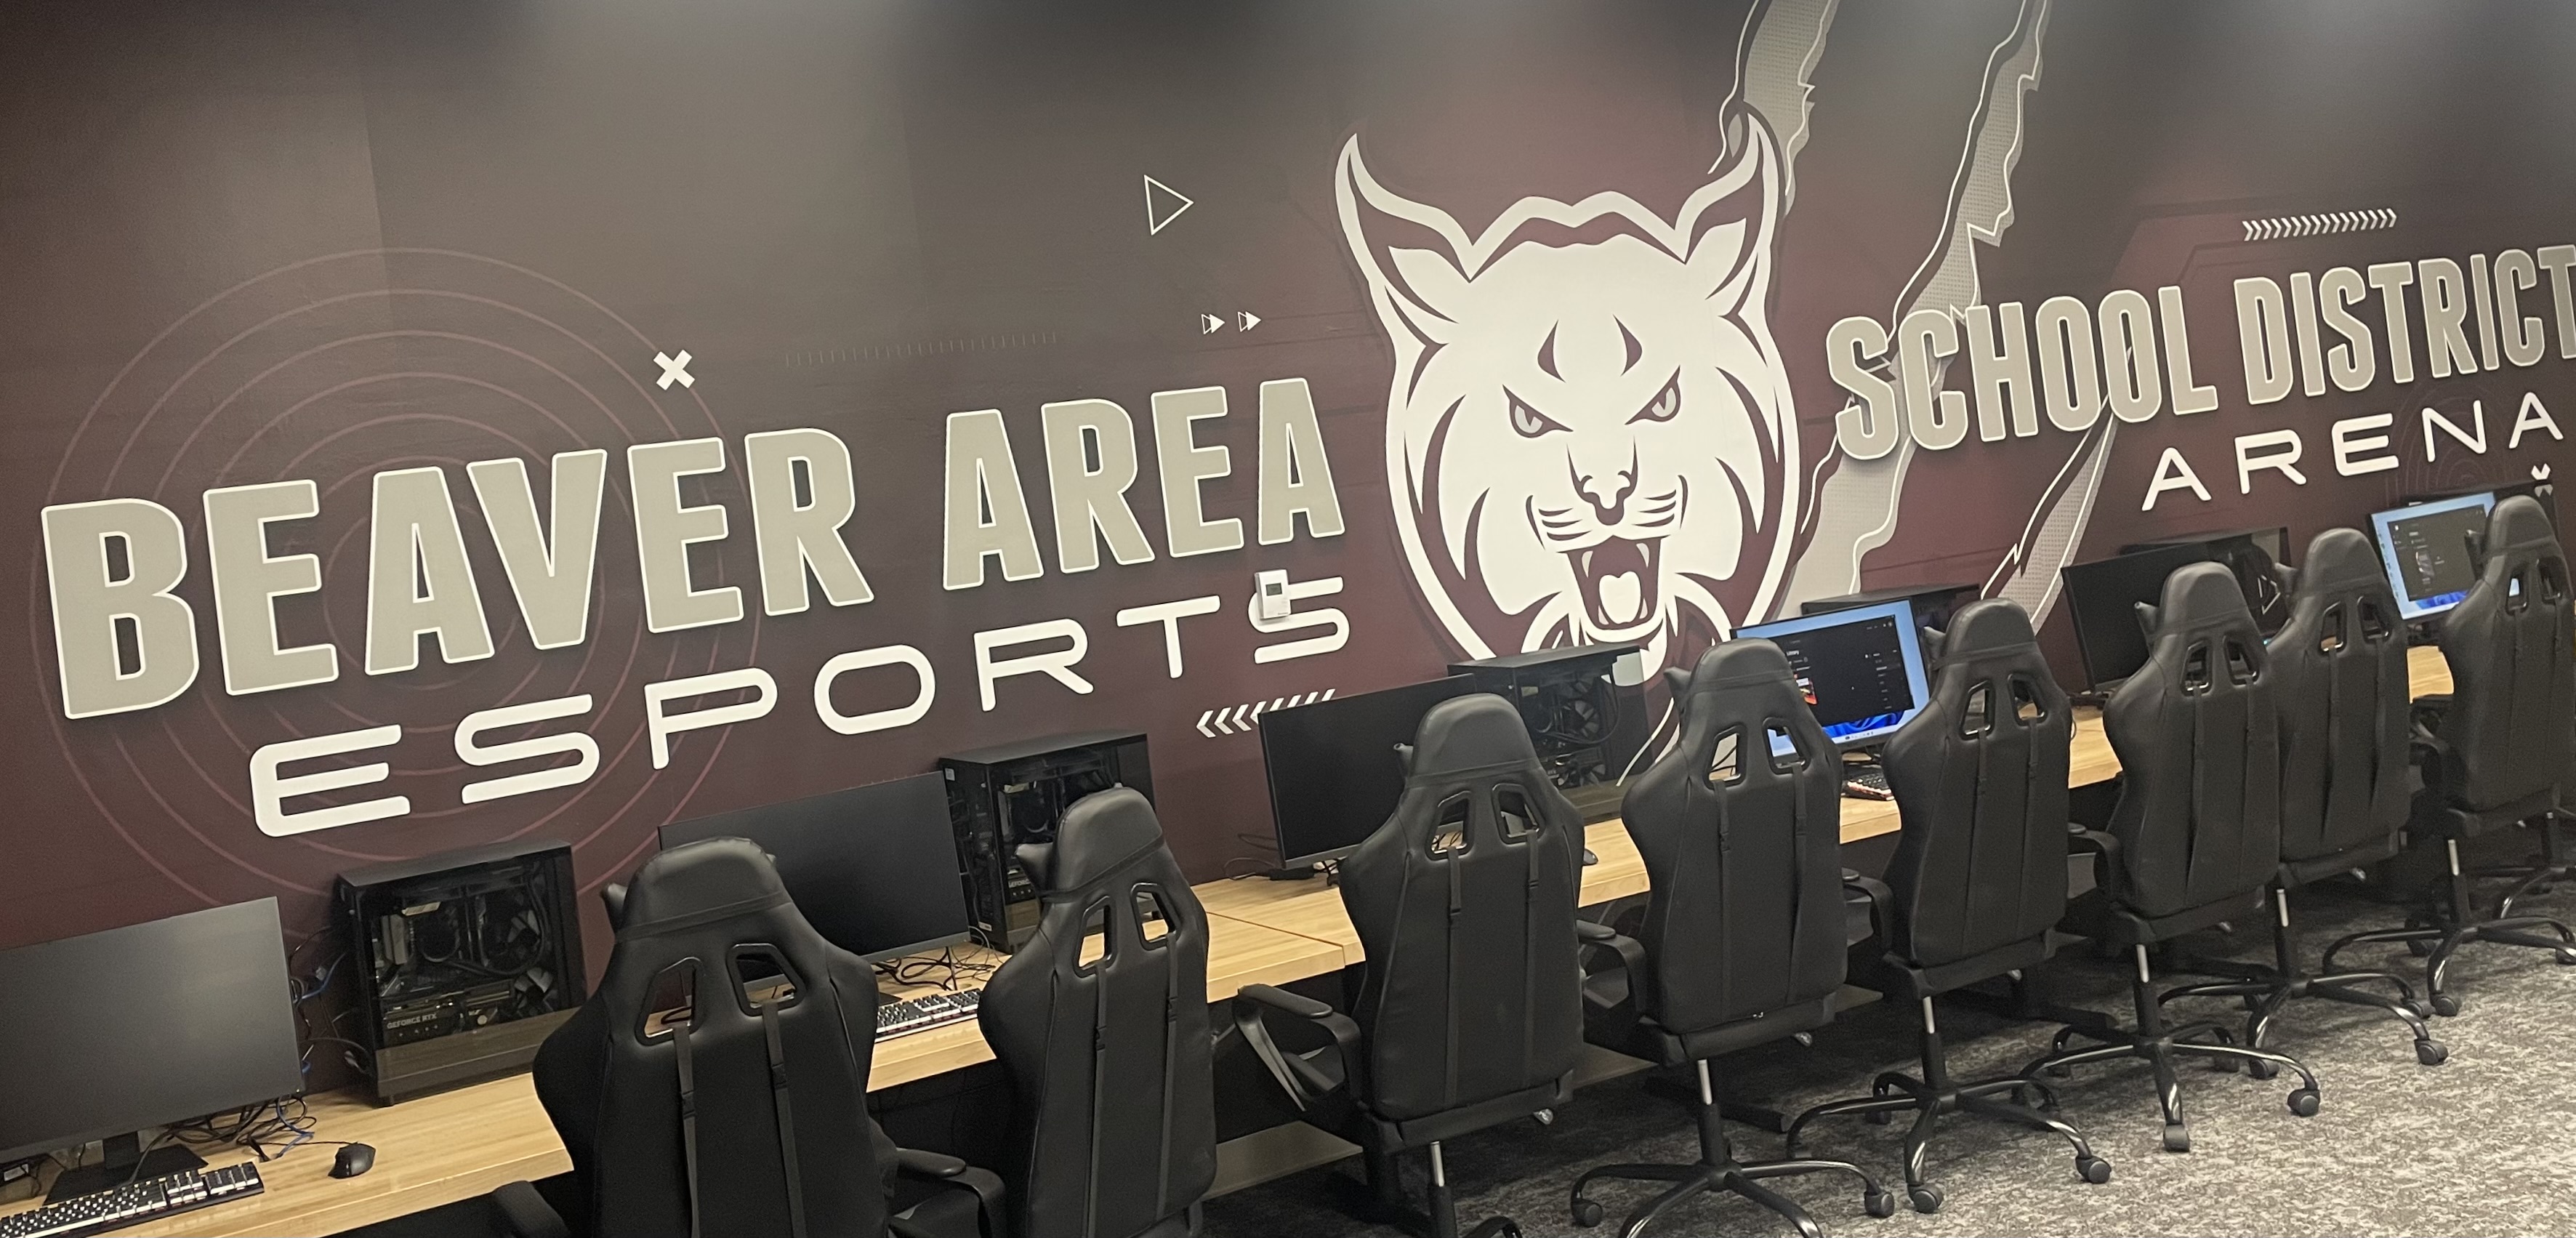 Image for 1st Annual Beaver Valley Middle Schools Esports Invitational Tournament